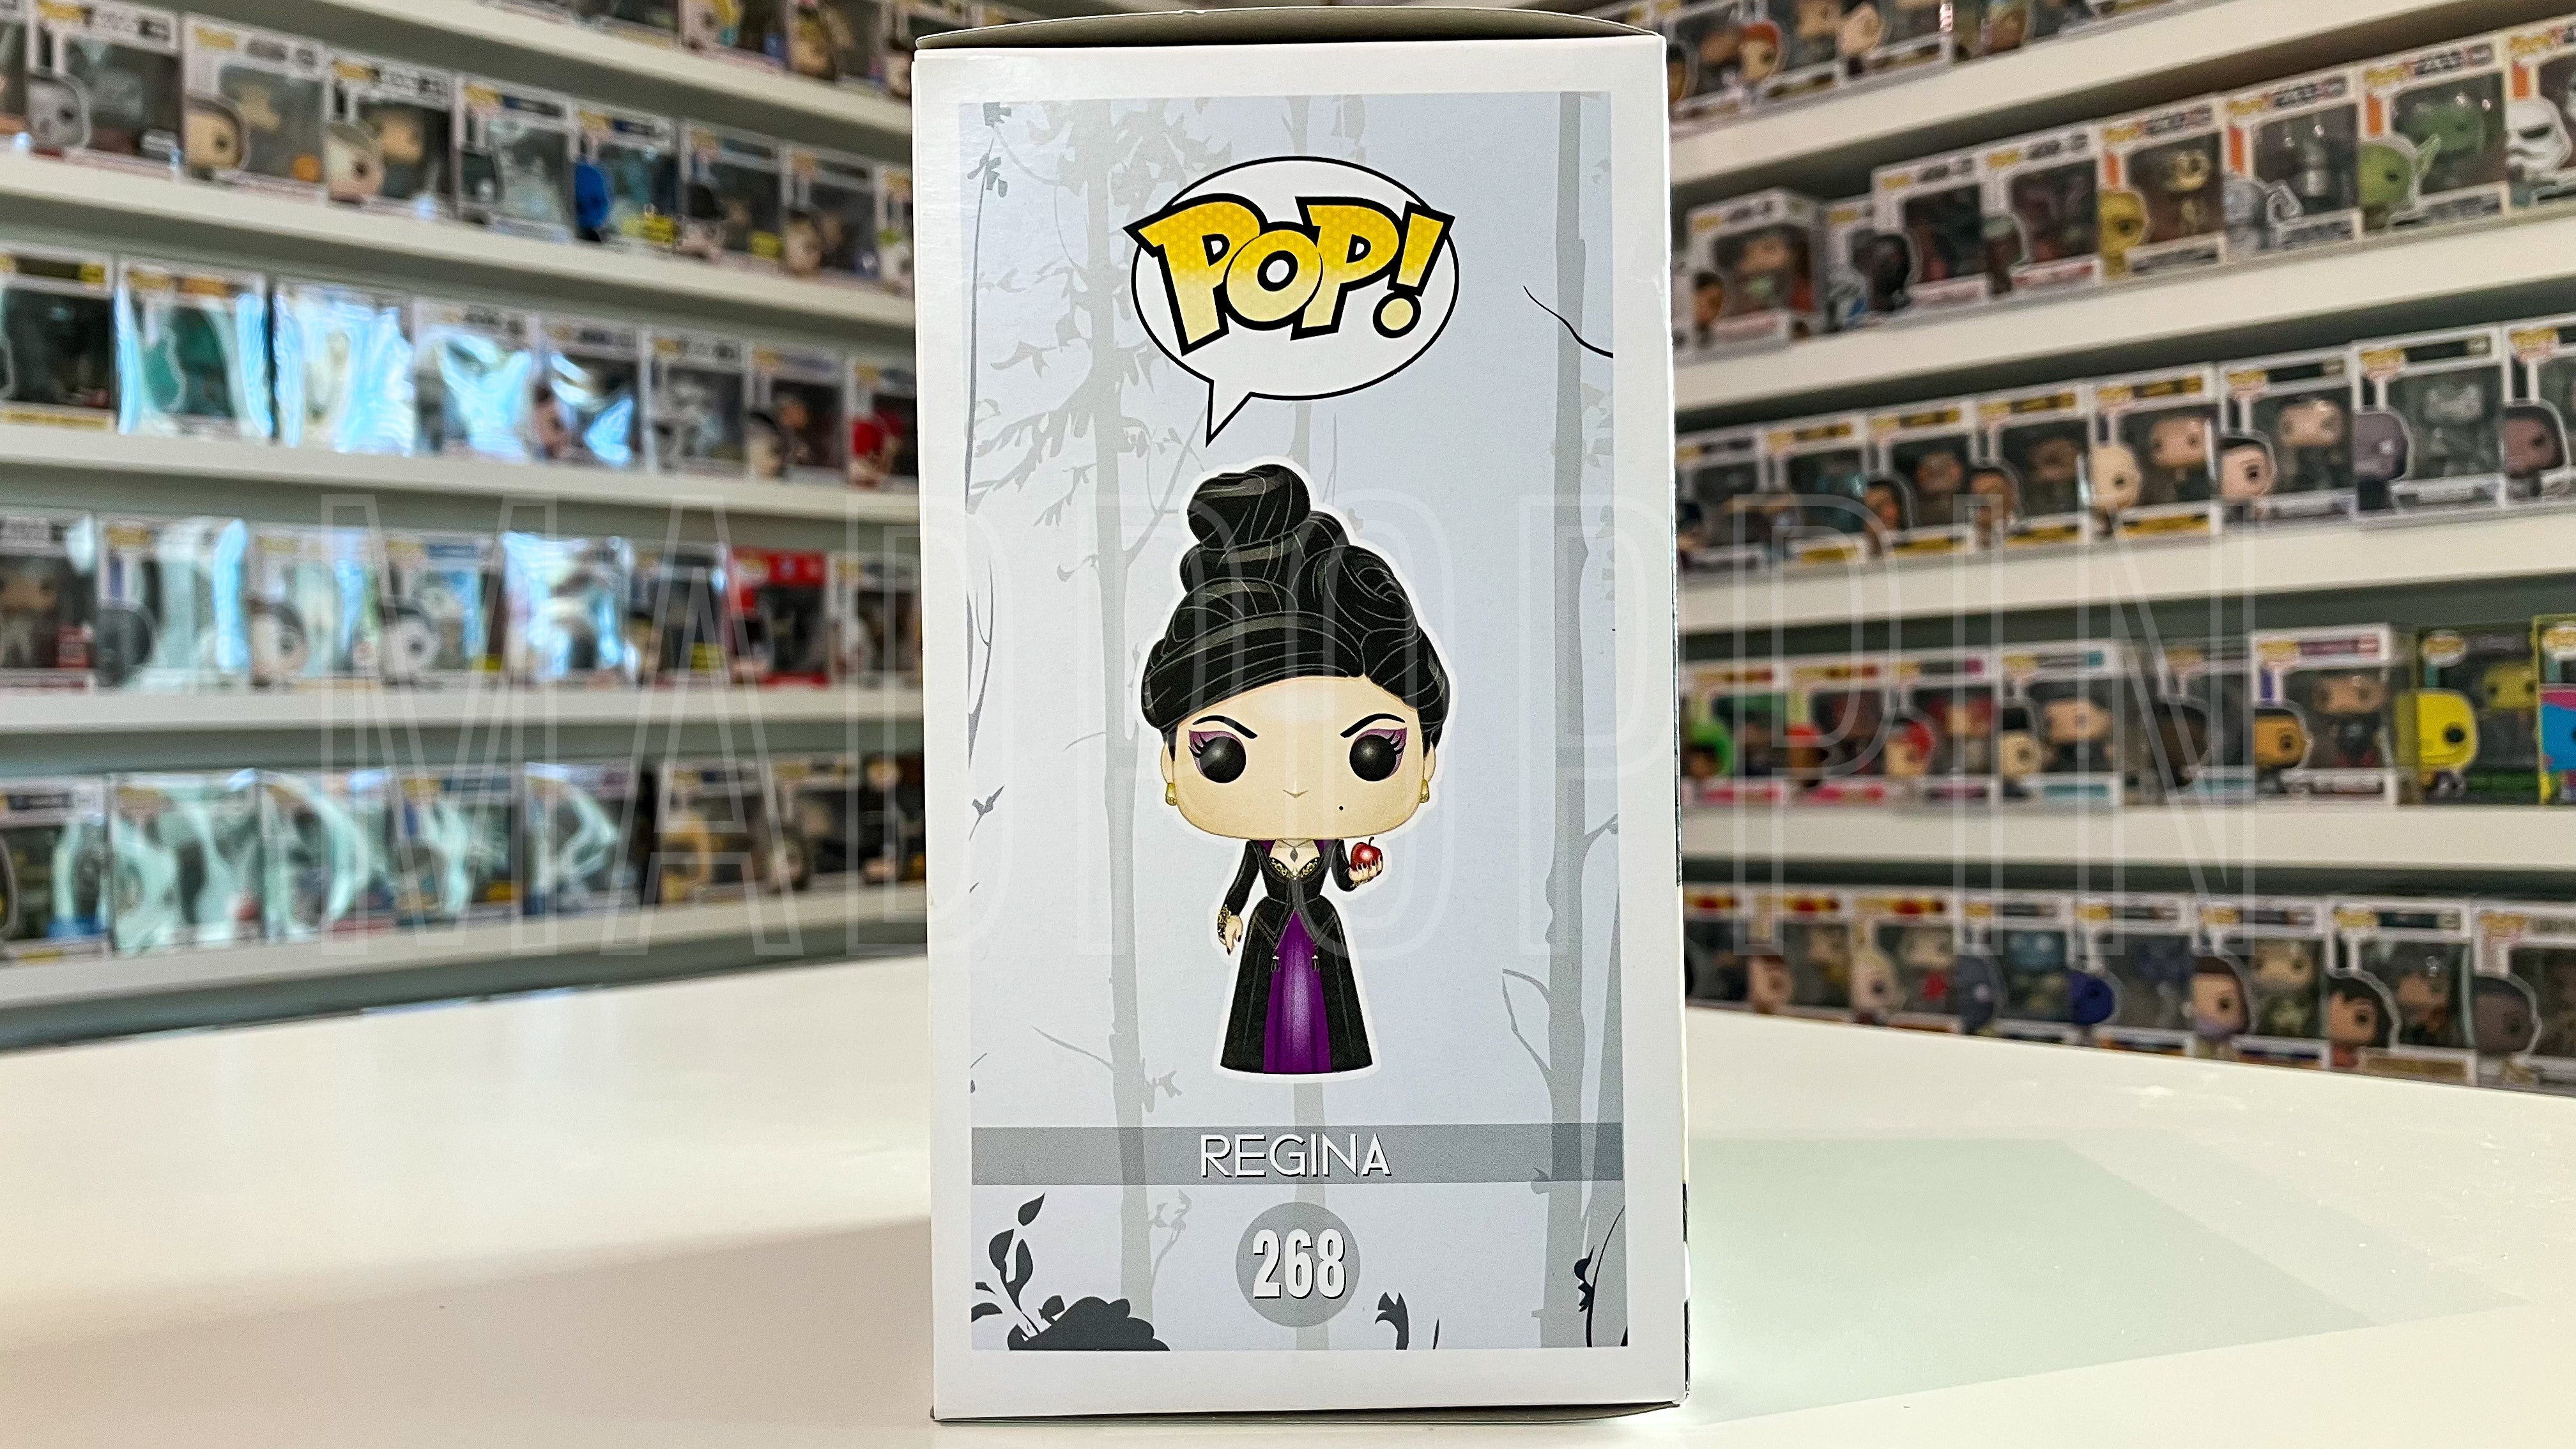 Funko POP! Television Once Upon a Time Regina Purple Boxlunch #268